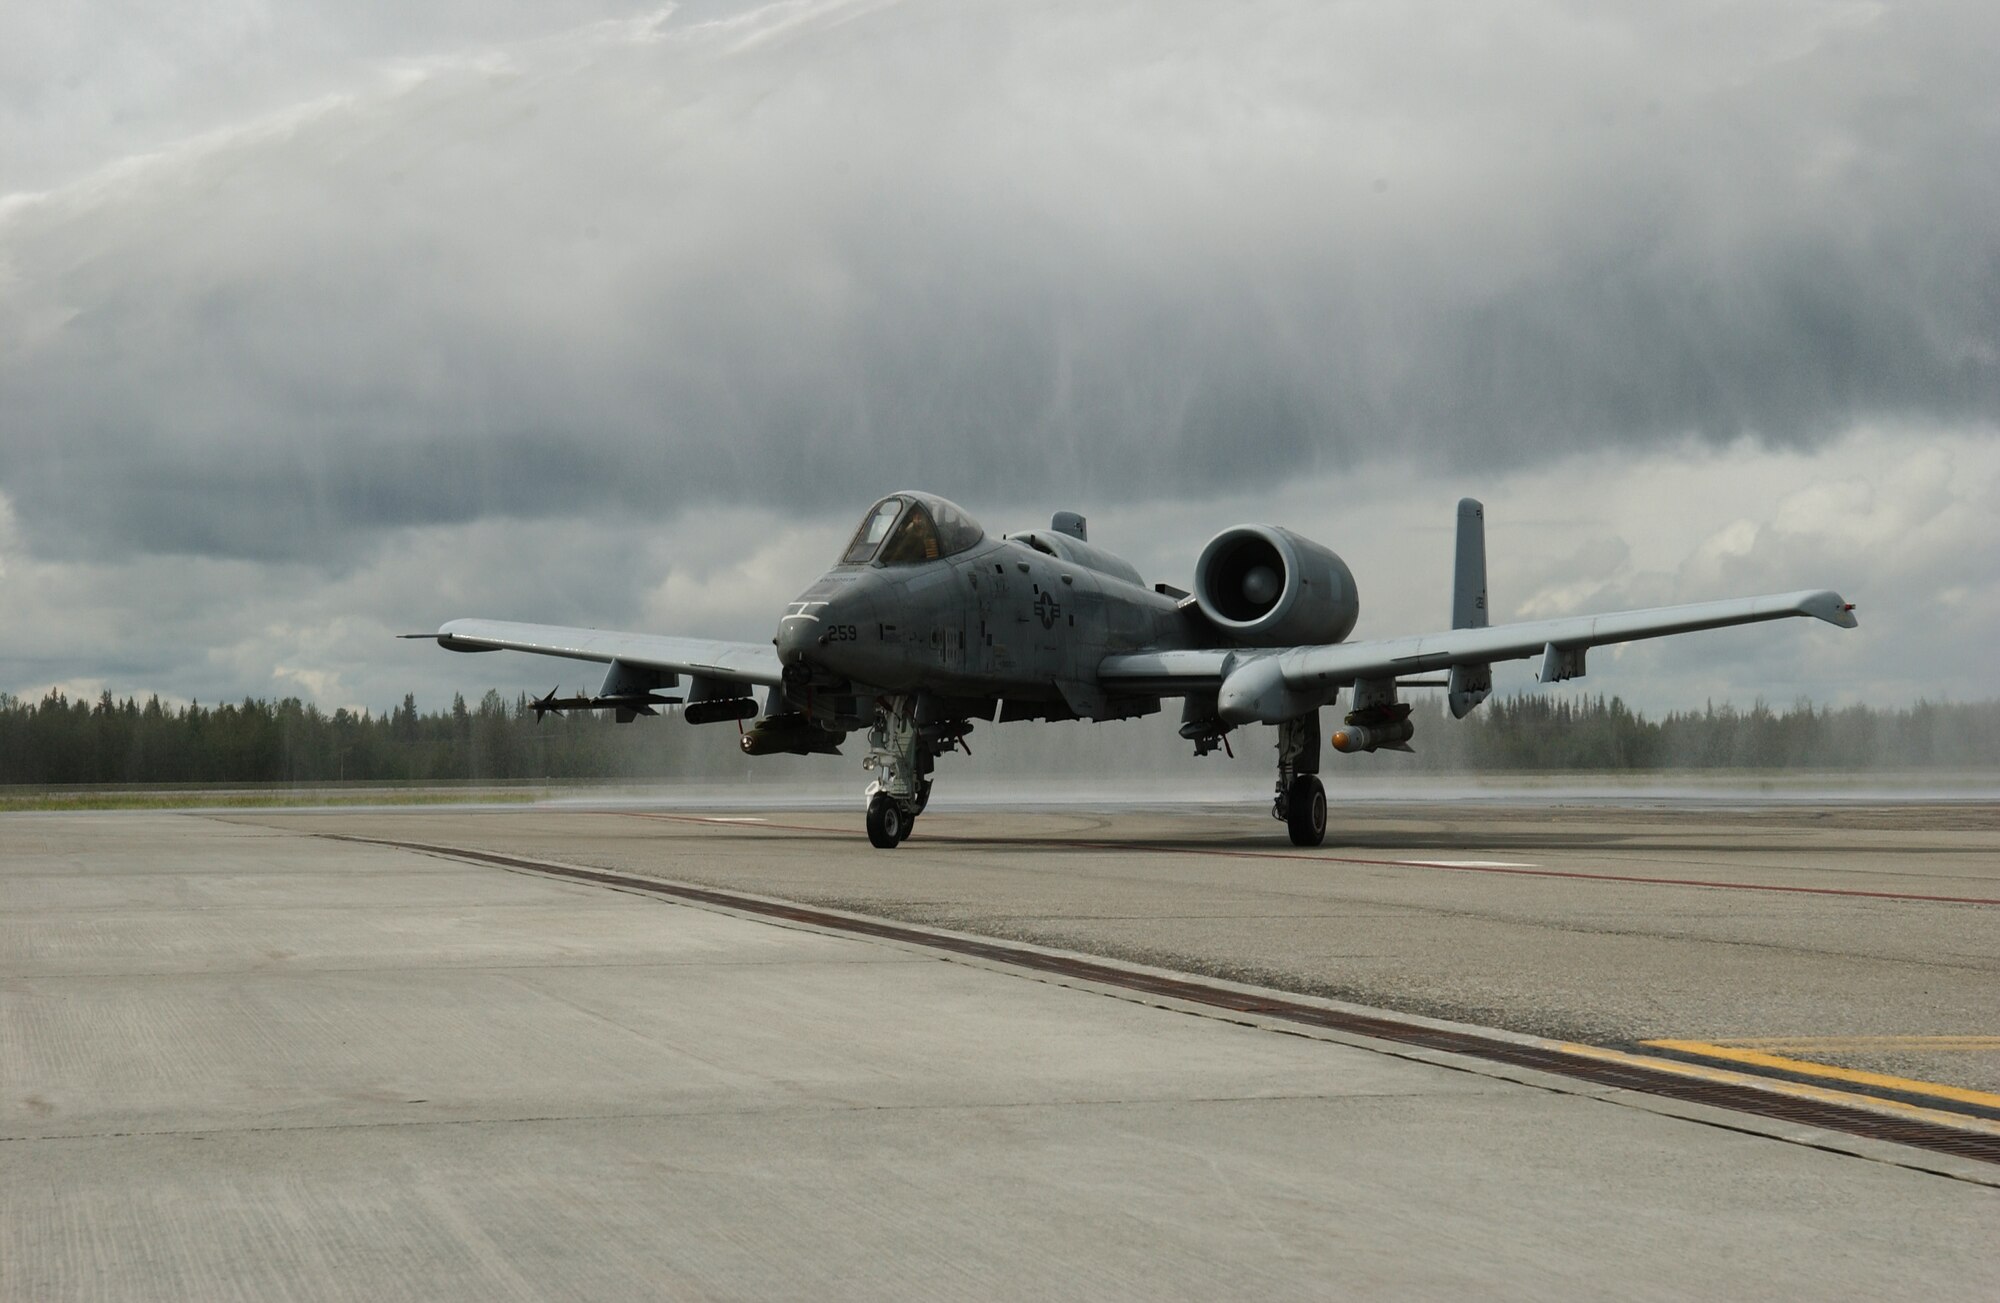 EIELSON AIR FORCE BASE, Alaska -- Lt. Col. Quentin Rideout, 355th Fighter Squadron Commander taxis his A-10 Thunderbolt back to the hawg pens on July 31. The first two A-10's arrived at Eielson on December 18, 1981, while the last two A-10's are set to leave on August 15, 2007 to Moody AFB, Ga., and Mountain Home AFB, Idaho (U.S. Air Force Photo by Airman 1st Class Jonathan Snyder)